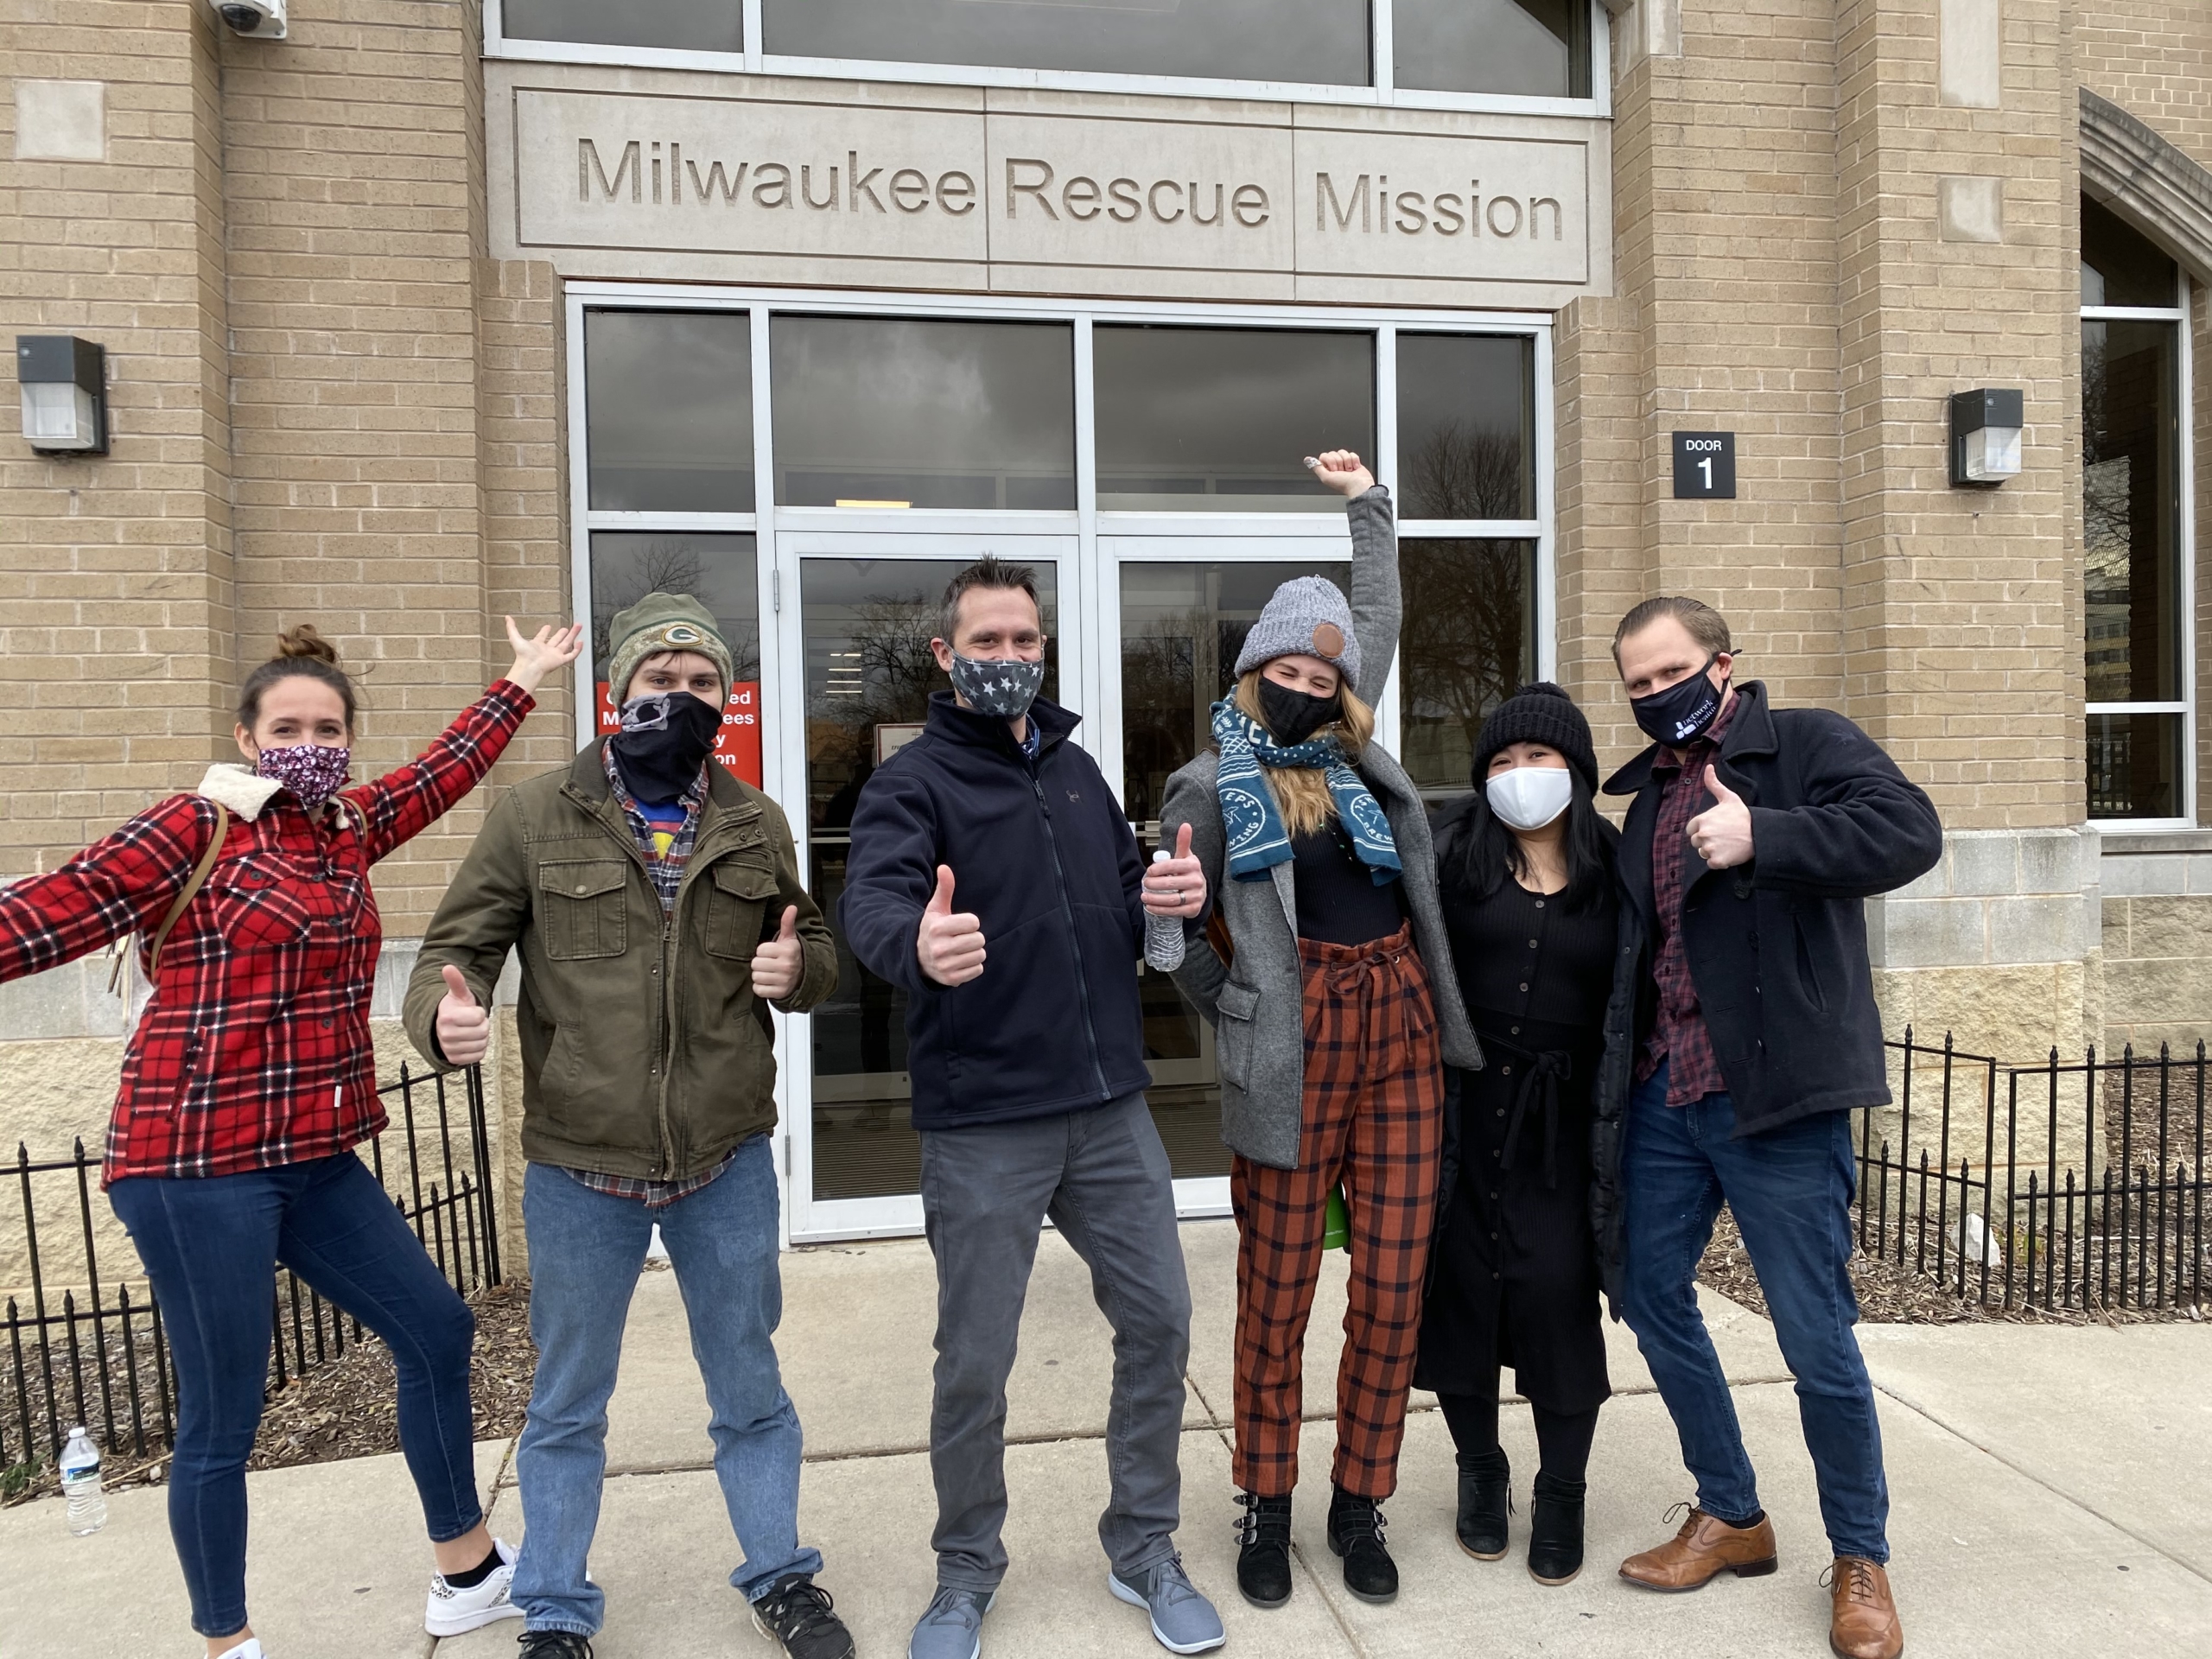 Brew City Marketing team giving back to the community by volunteering at the Milwaukee Rescue Mission